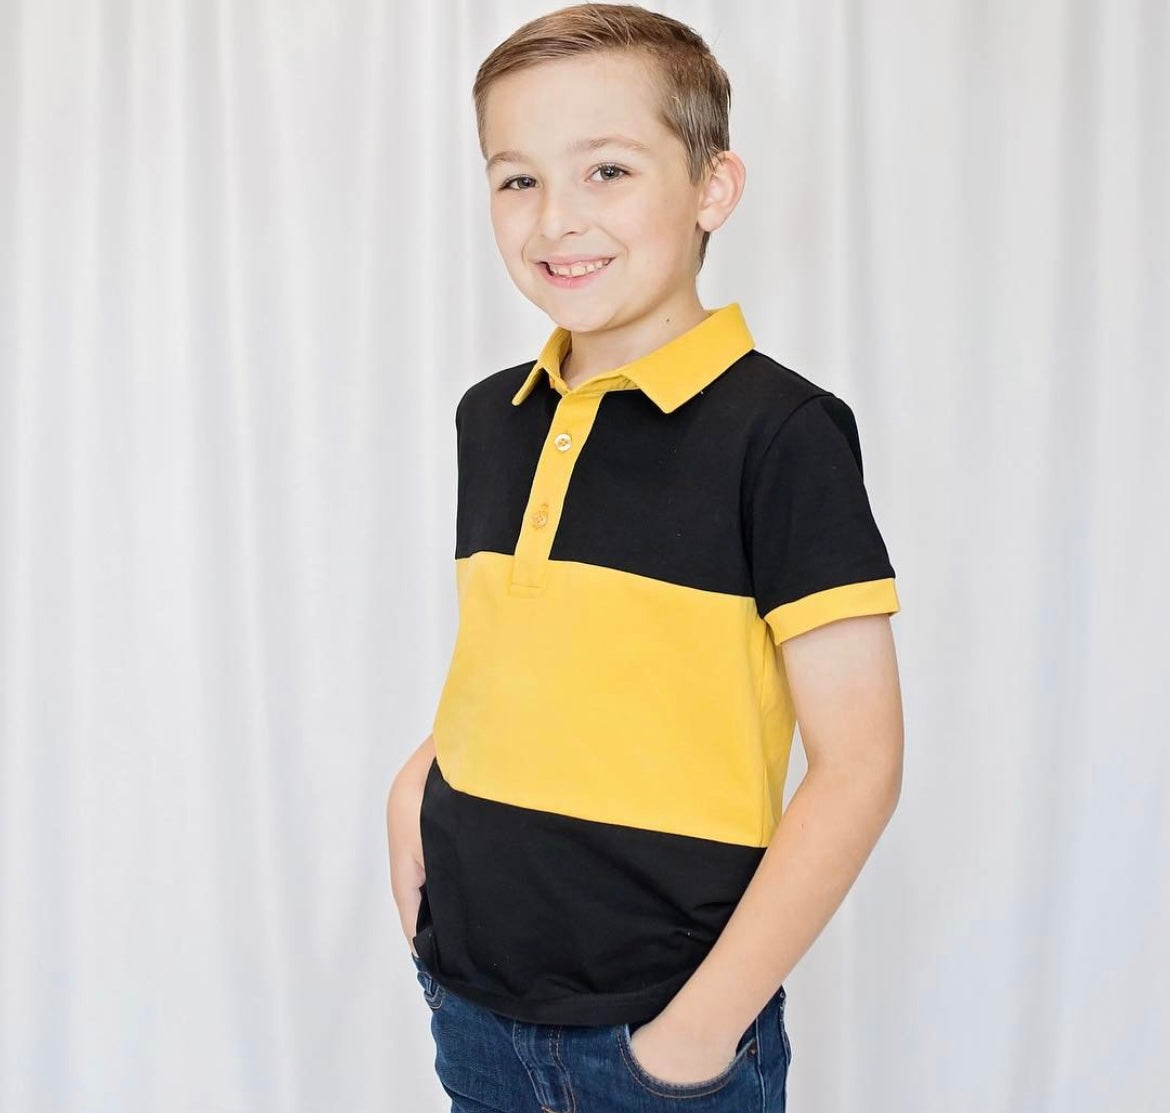 My Three Sons Vault Fan Favorite Black and Gold Boy’s Collared Knit Polo